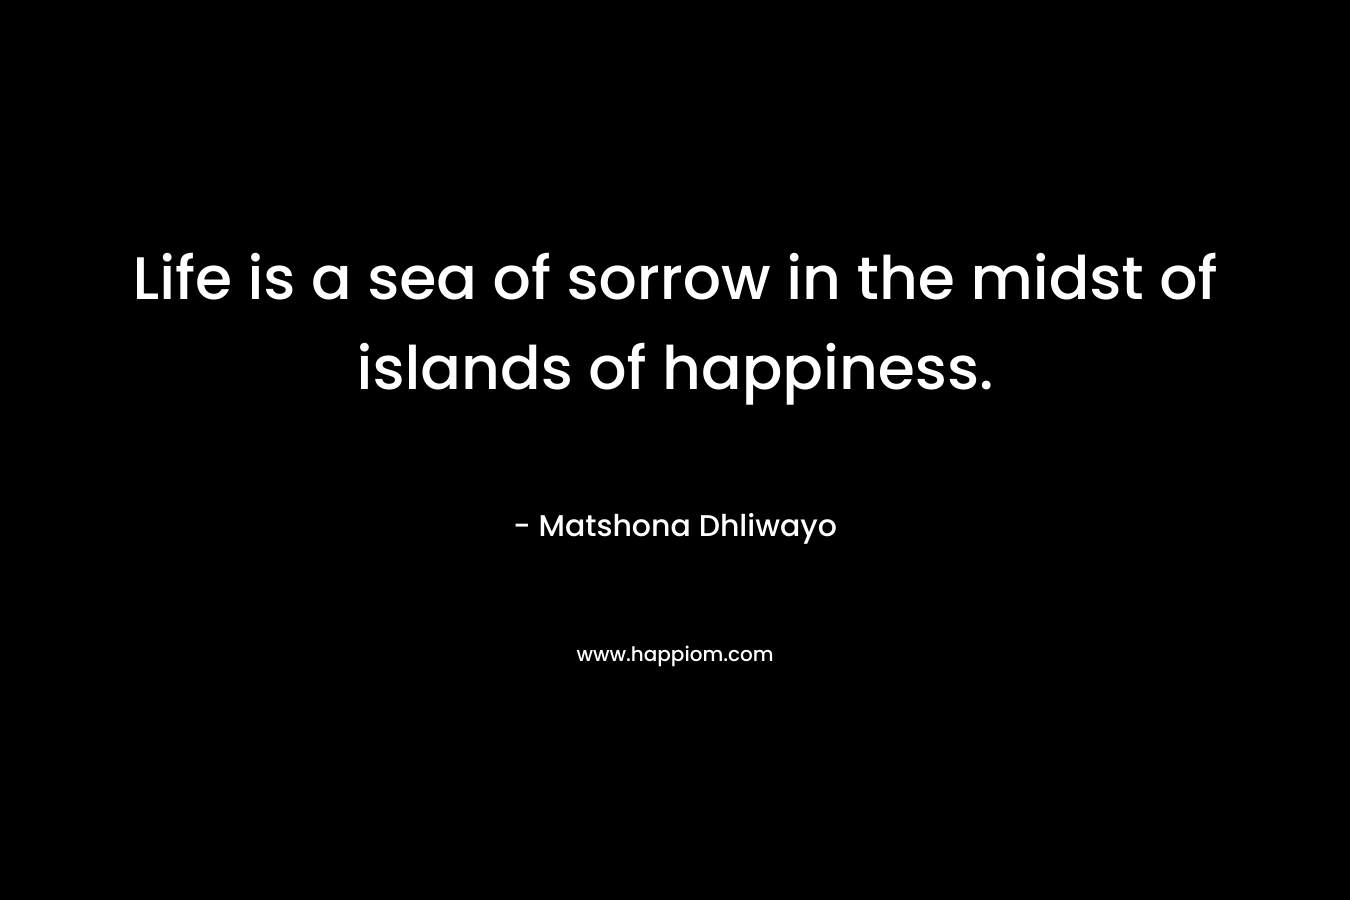 Life is a sea of sorrow in the midst of islands of happiness. – Matshona Dhliwayo